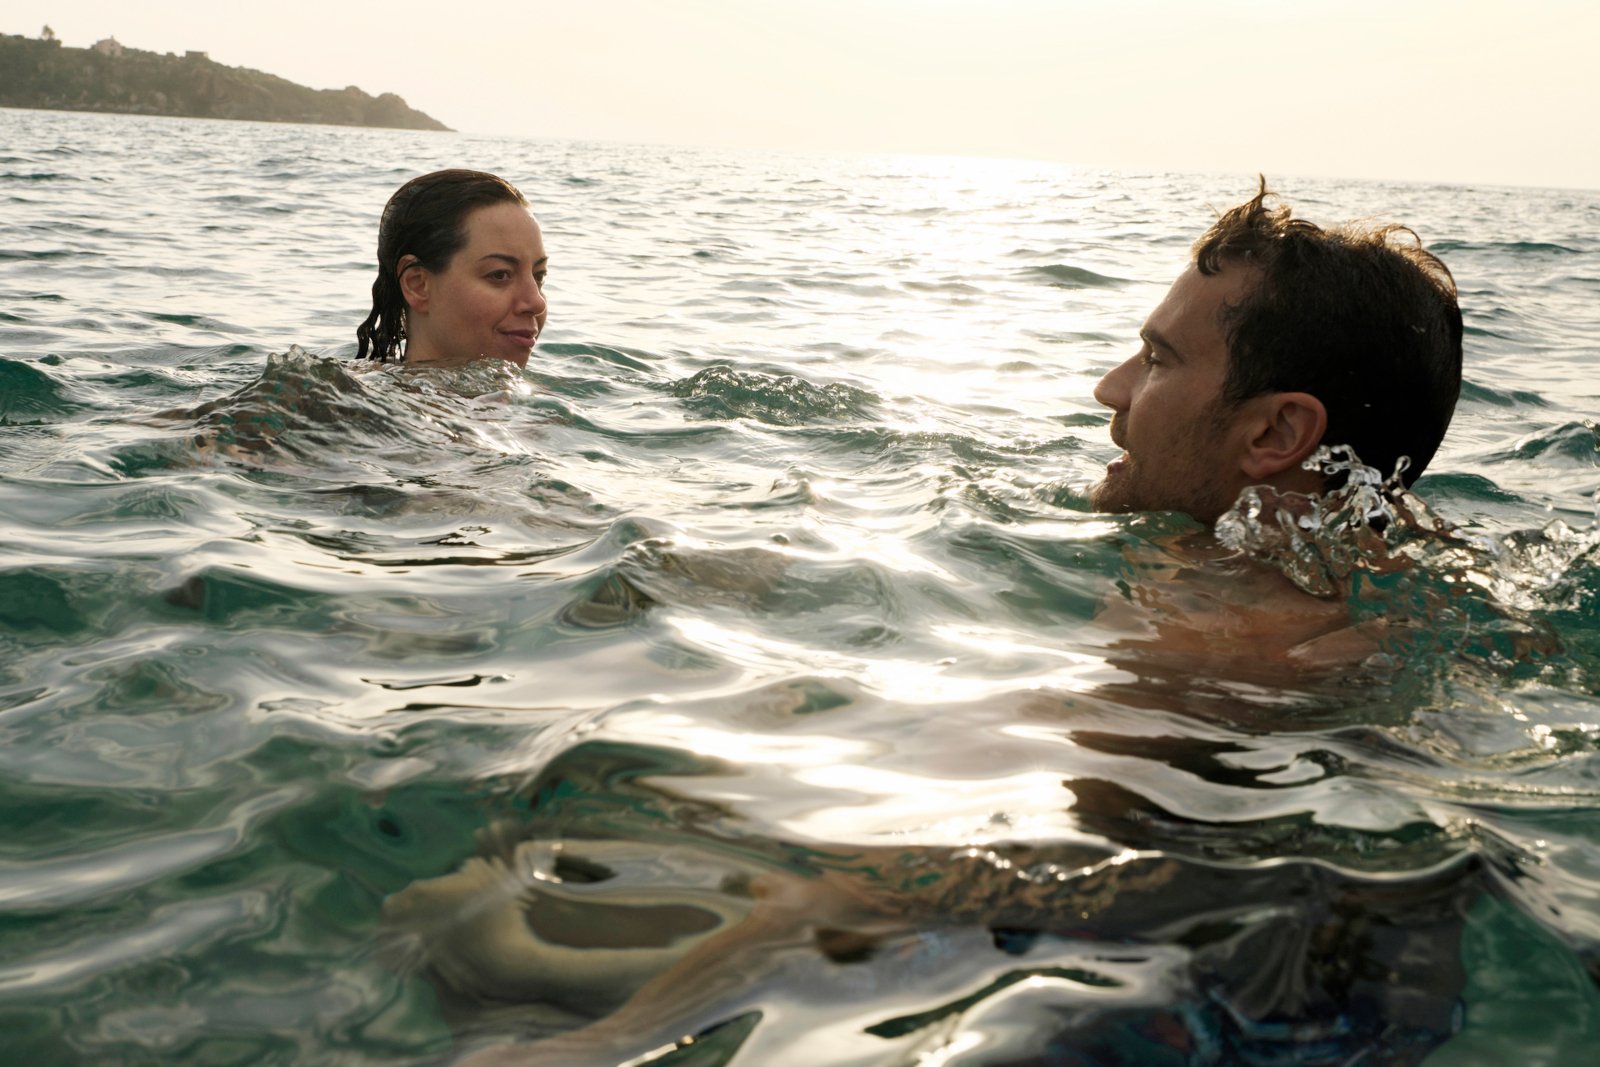 Aubrey Plaza and Theo James in 'The White Lotus' Season 2. They're swimming in the ocean.